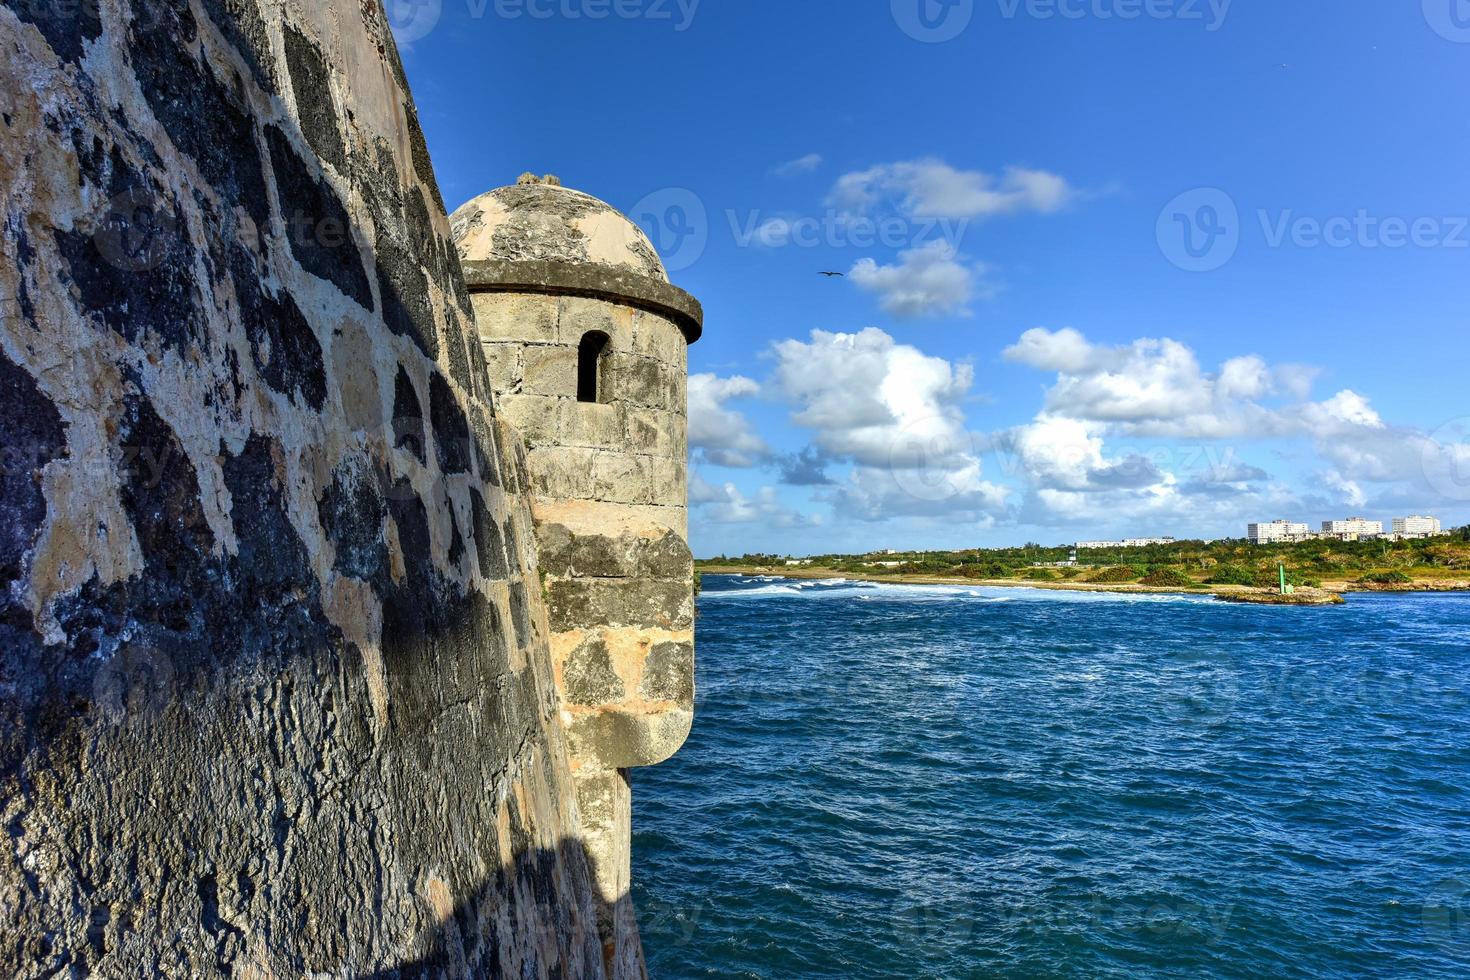 The Spanish fort, Torreon de Cojimar, in Cohimar, Cuba. Cojimar is a small fishing village east of Havana. It was an inspiration for Ernest Hemingway's famous novel The Old Man and the Sea. photo